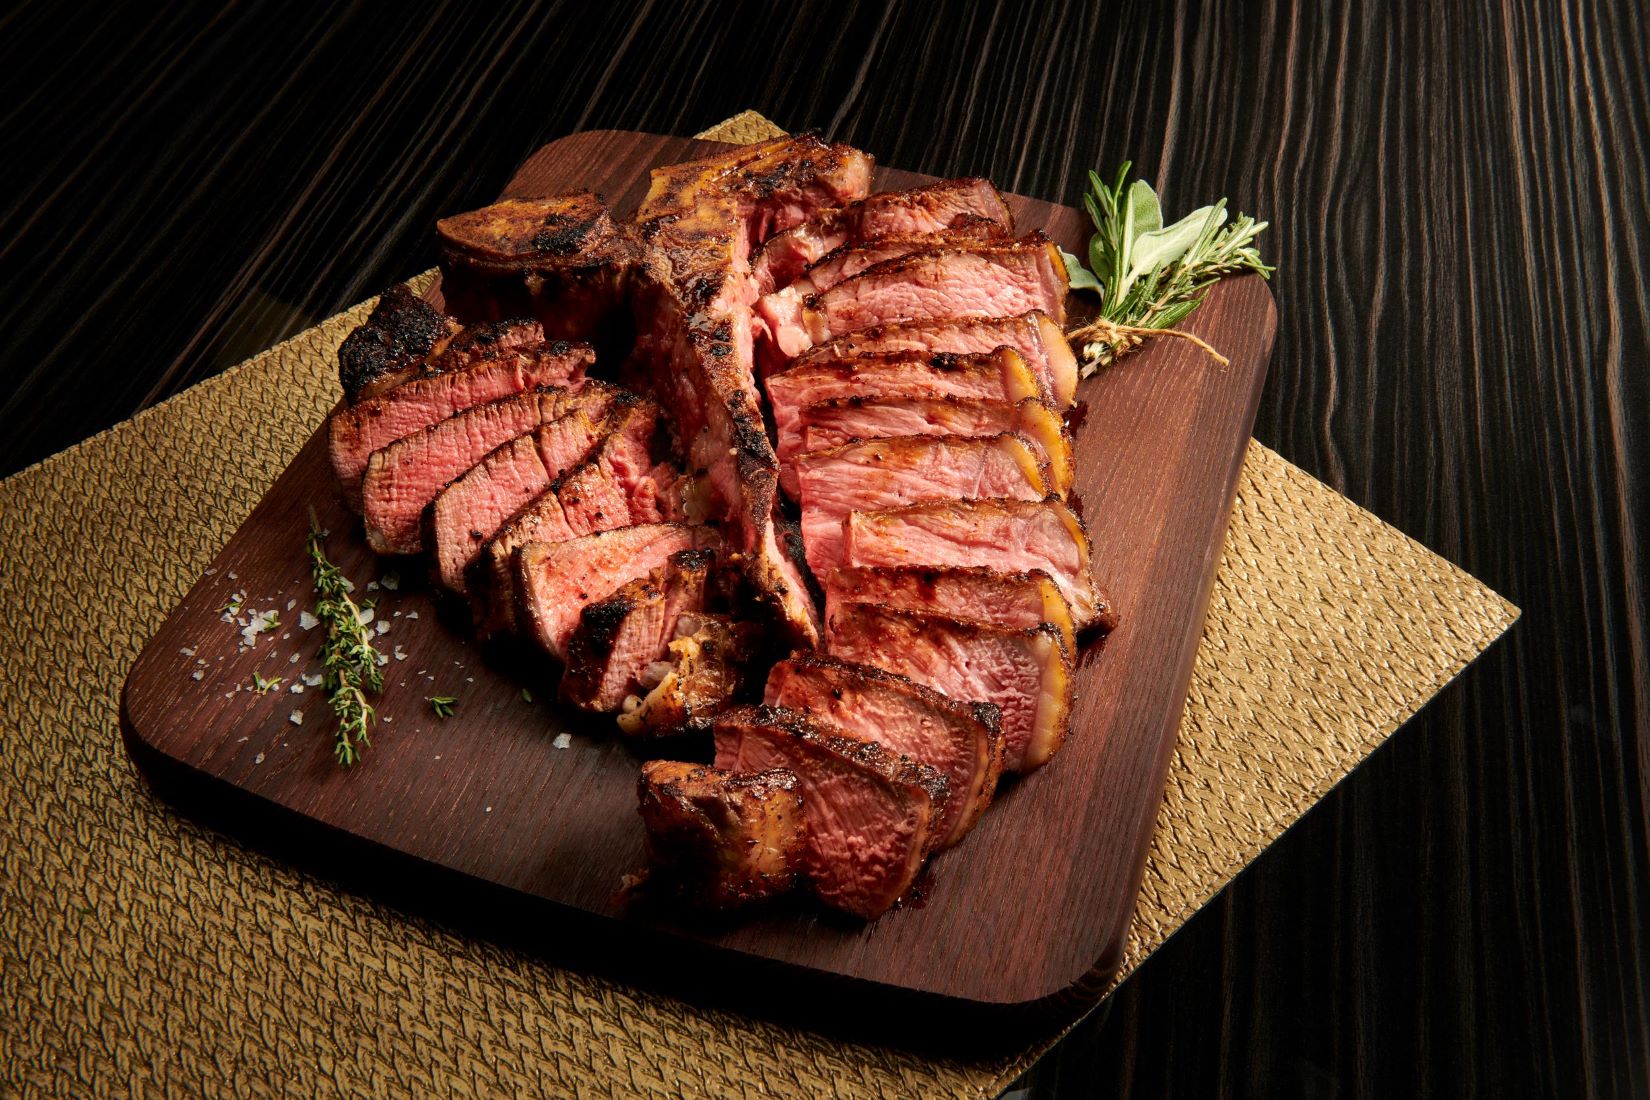 An image of Morton's 45-day Dry-Aged Porterhouse for their Best Steak Anywhere promotion.